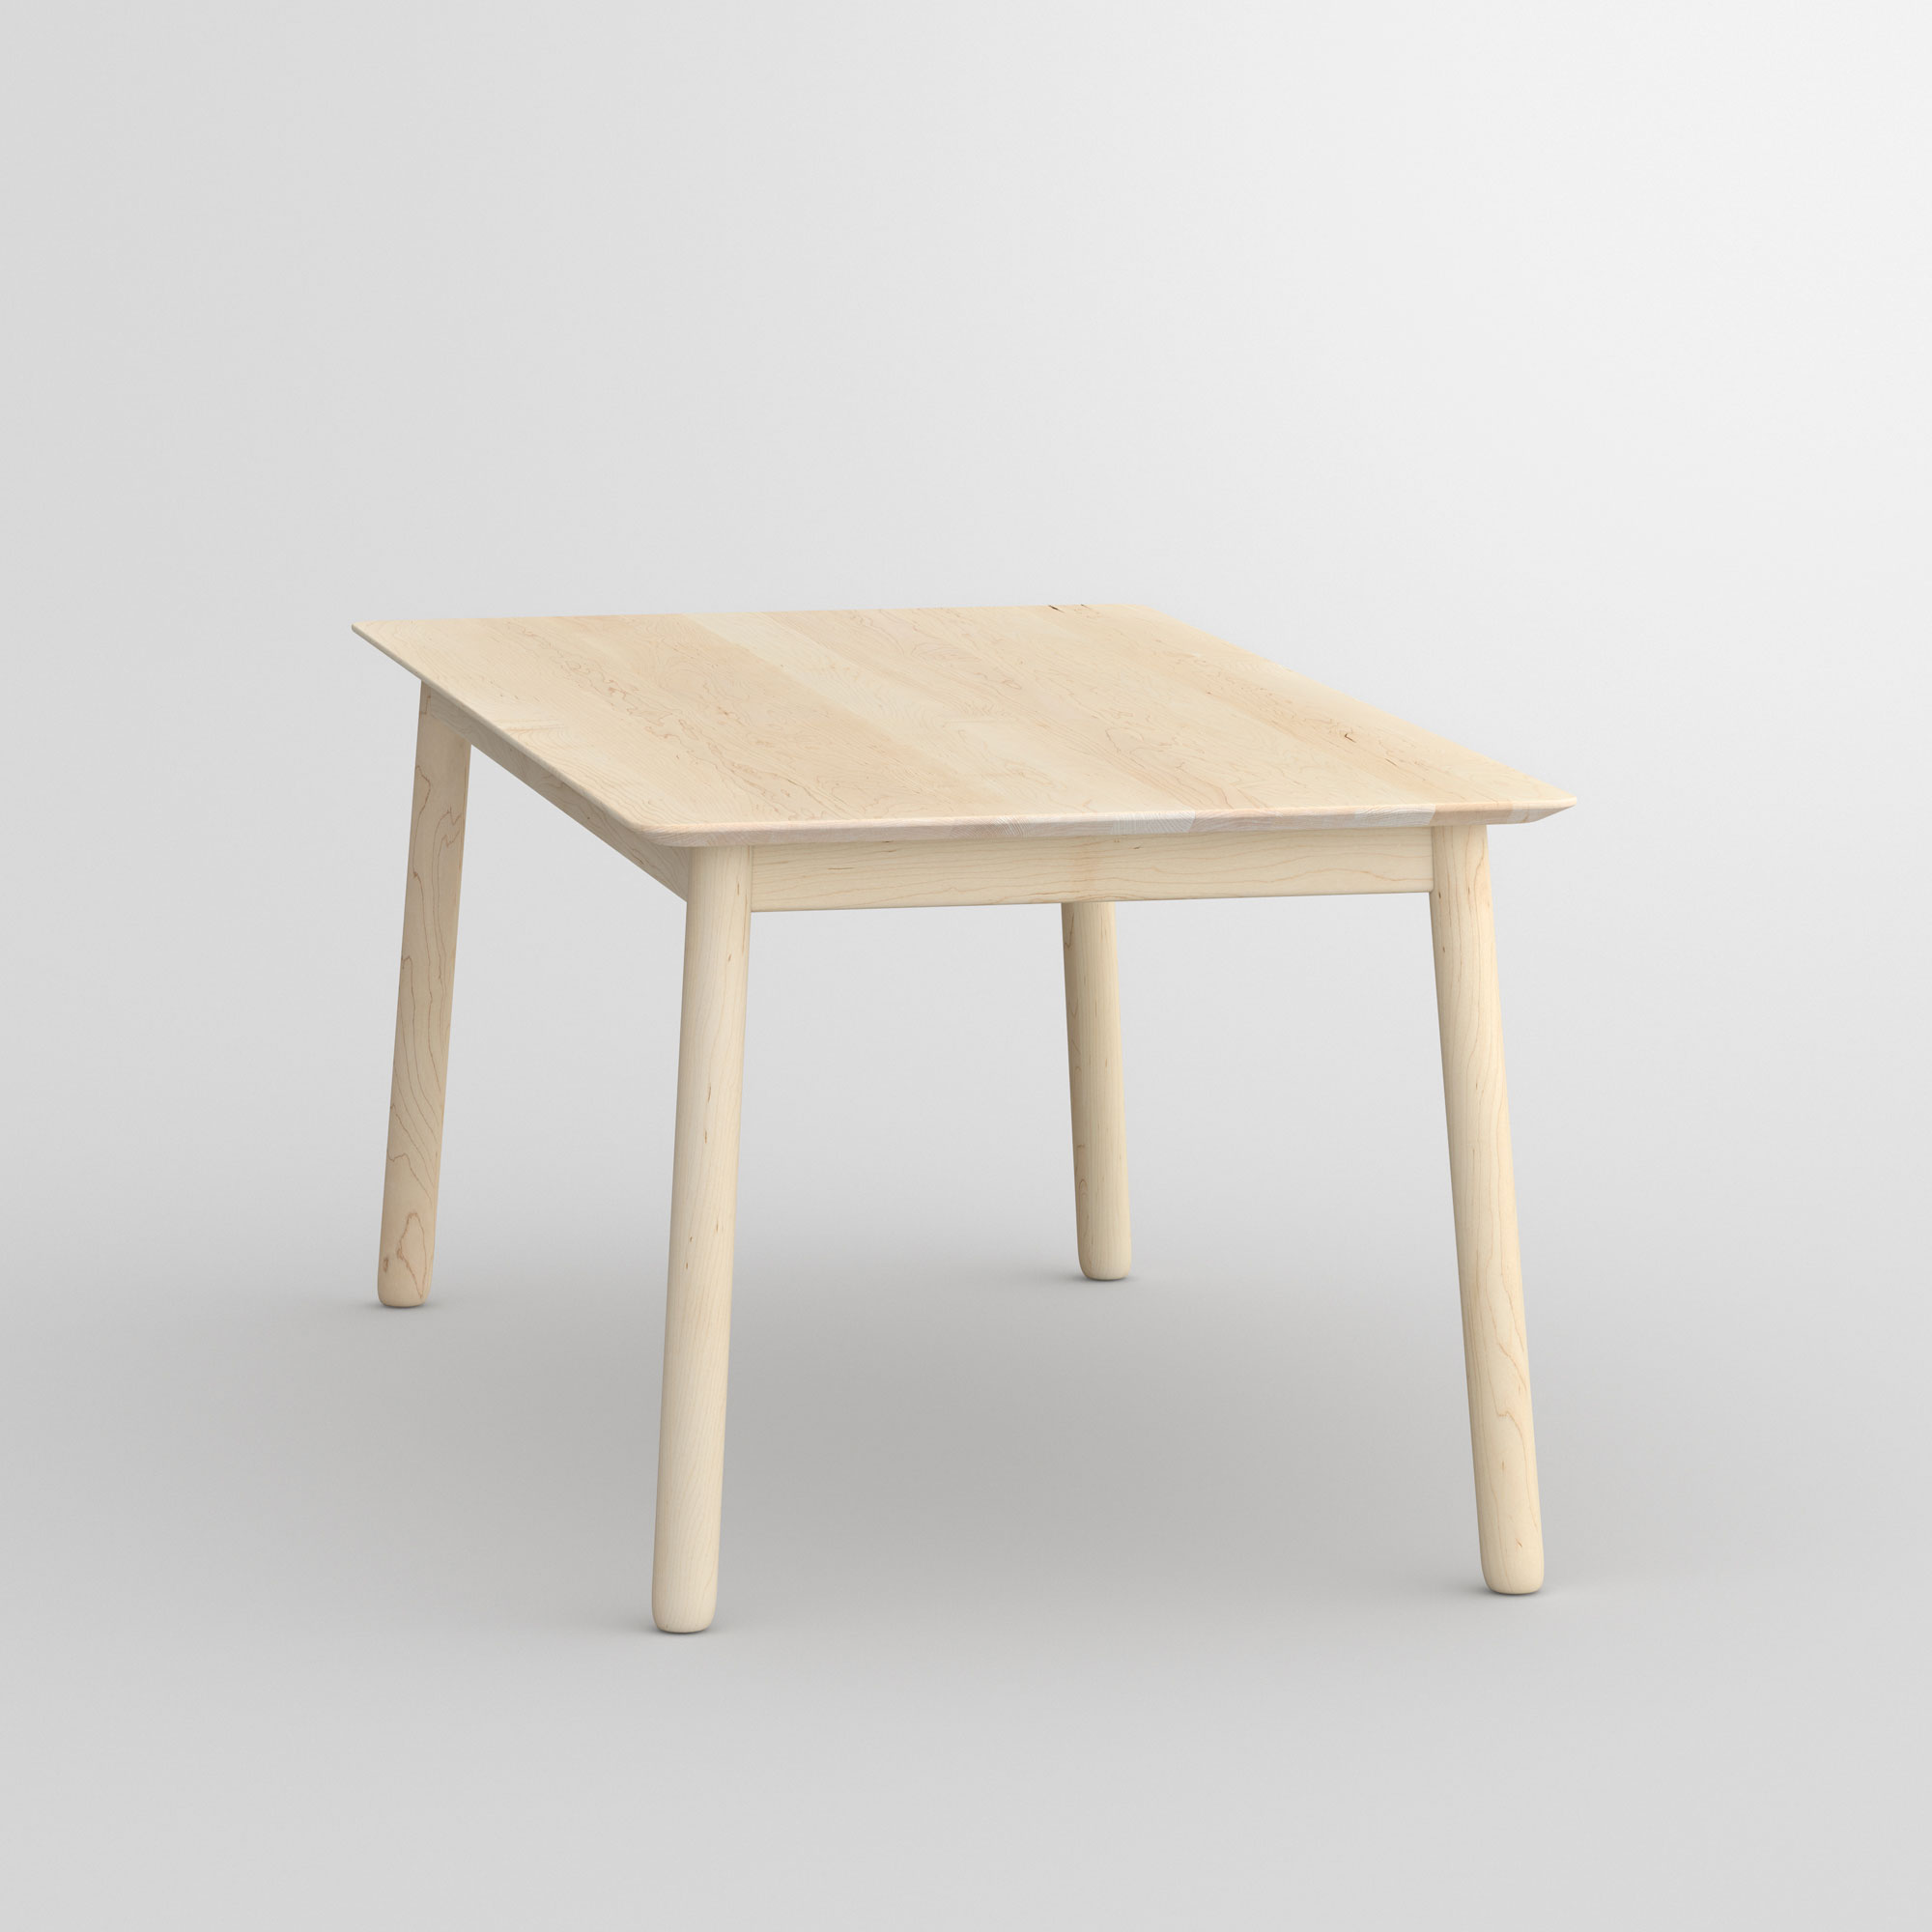 Style Wood Table LOCA cam3 custom made in solid wood by vitamin design